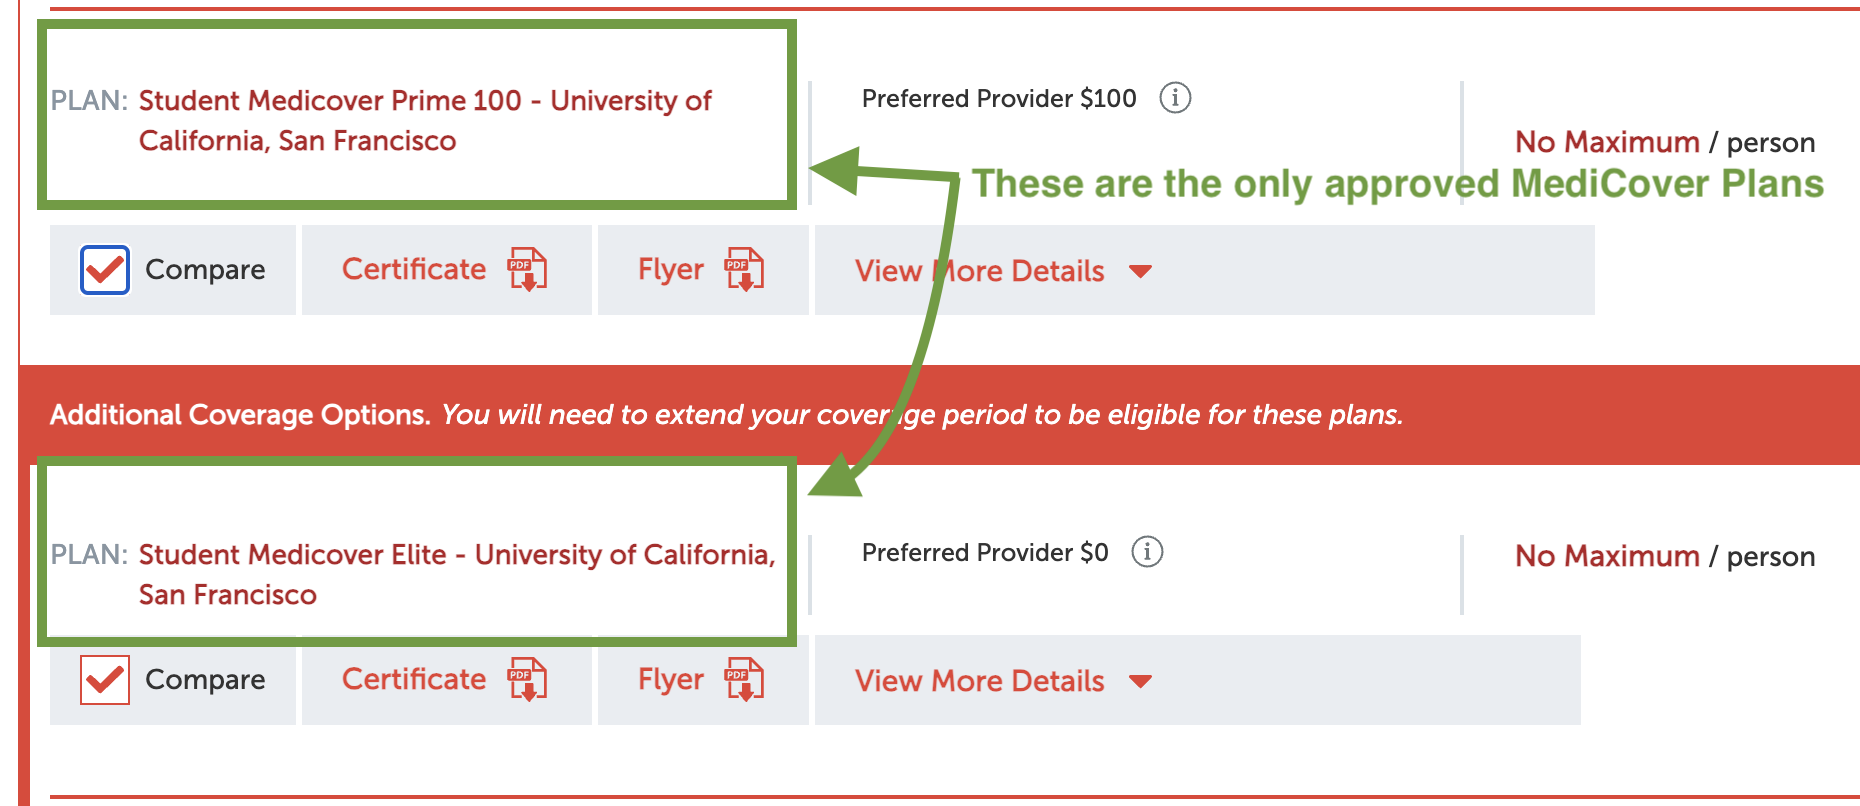 Approved Medicover Plans - Elite and Prime are the only approved MediCover options.